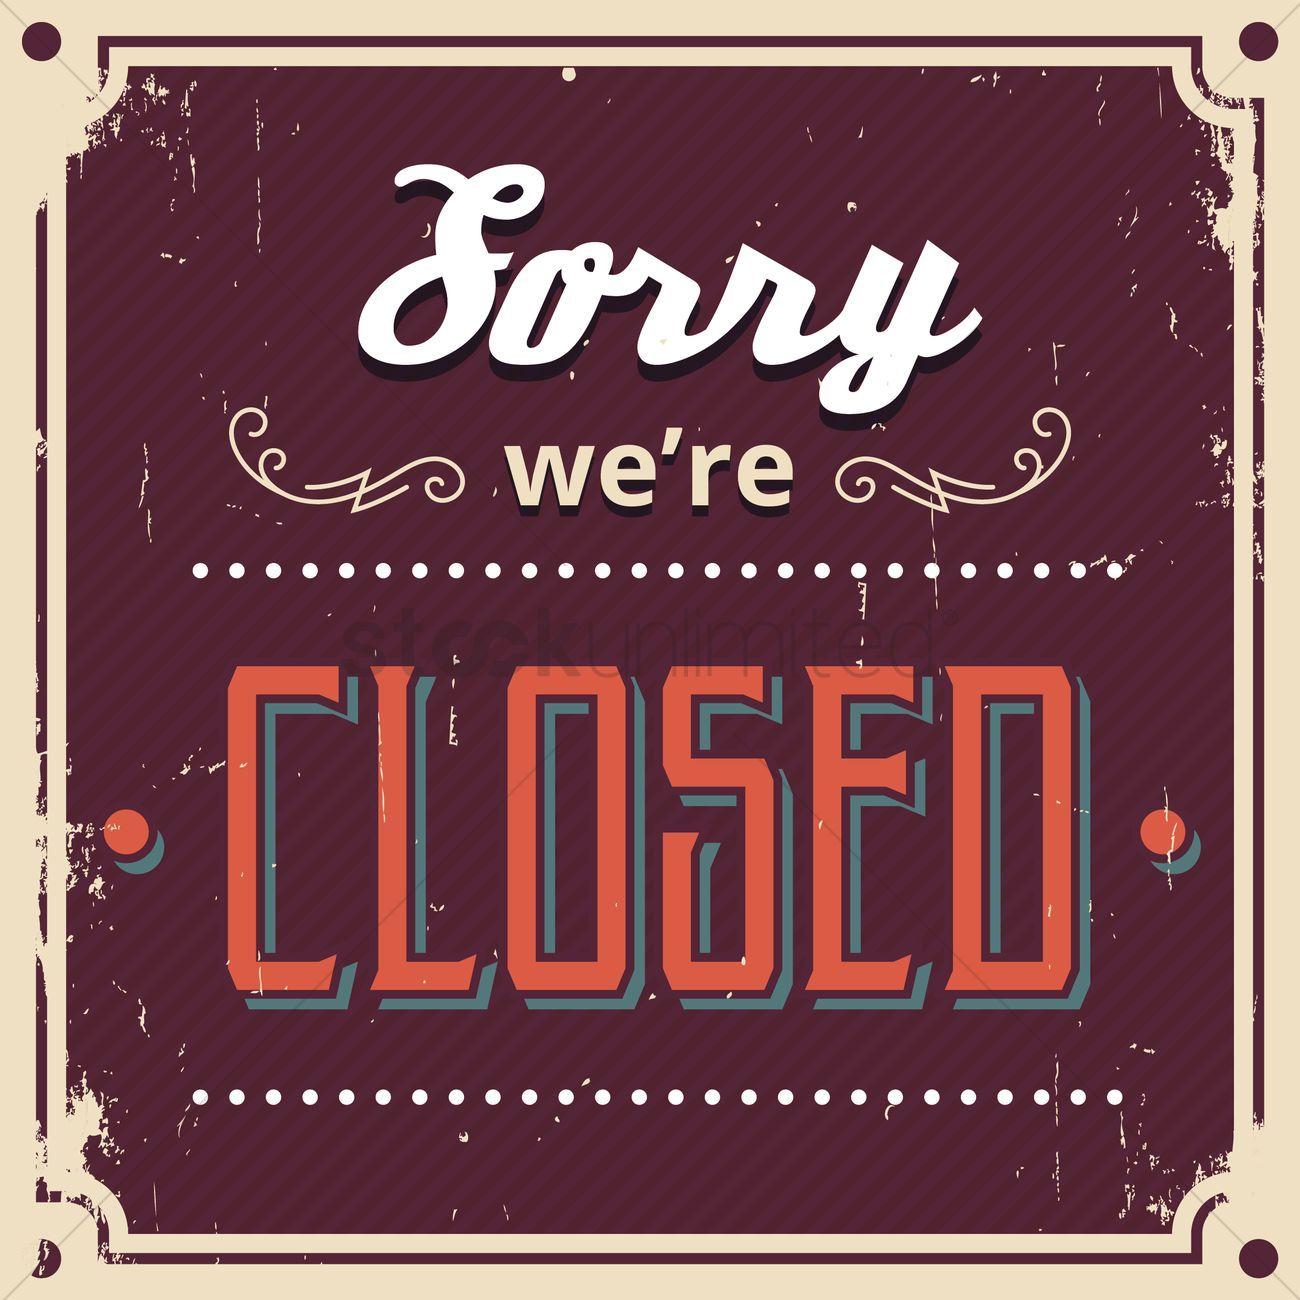 Sorry we're closed wallpaper Vector Image